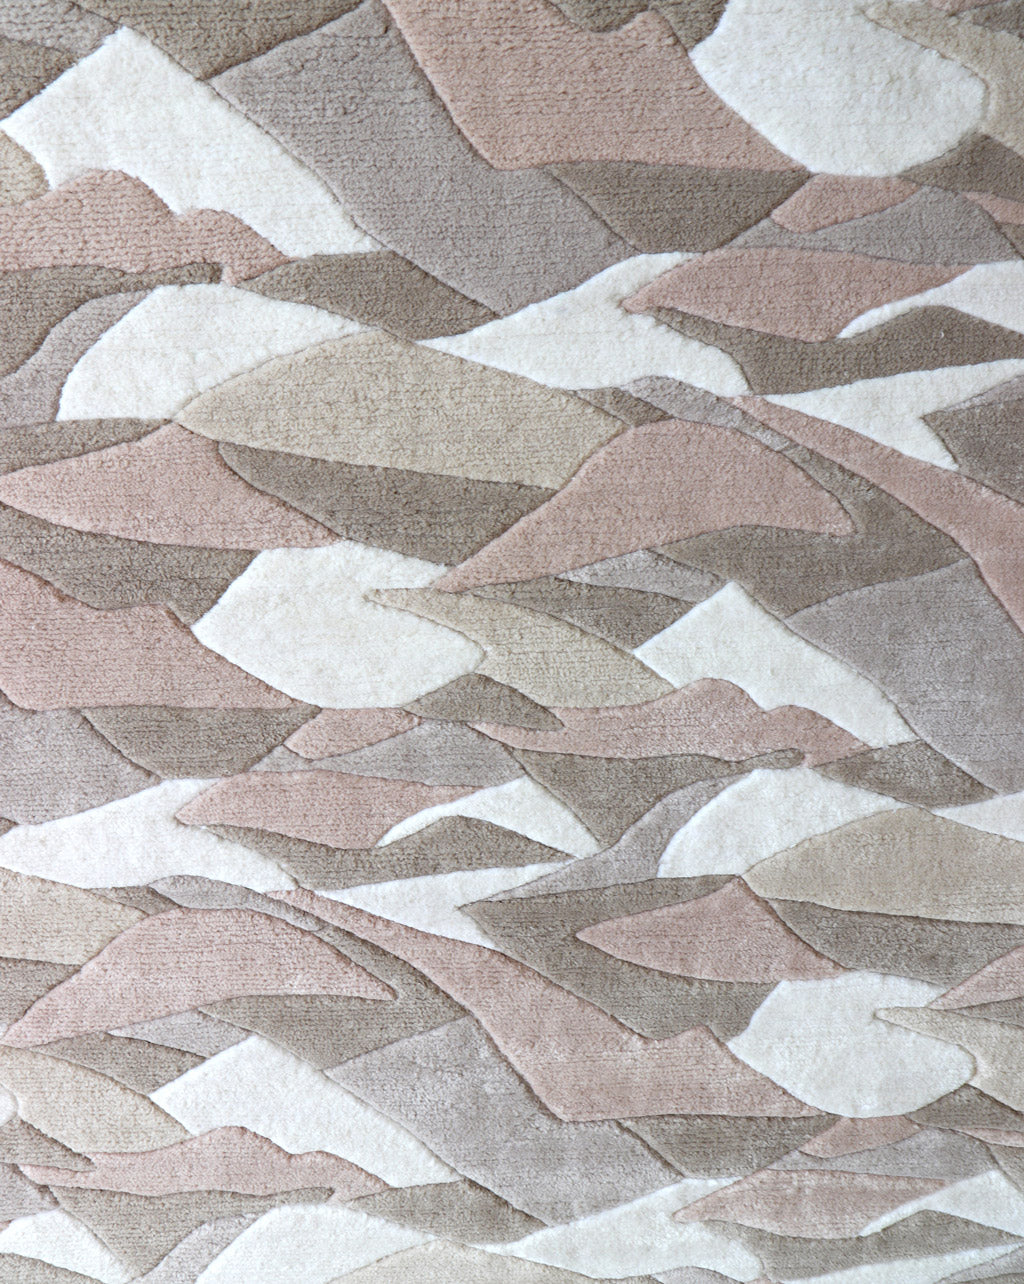 A Mani Hand Knotted Rug made of merino wool with a pattern of mountains on it